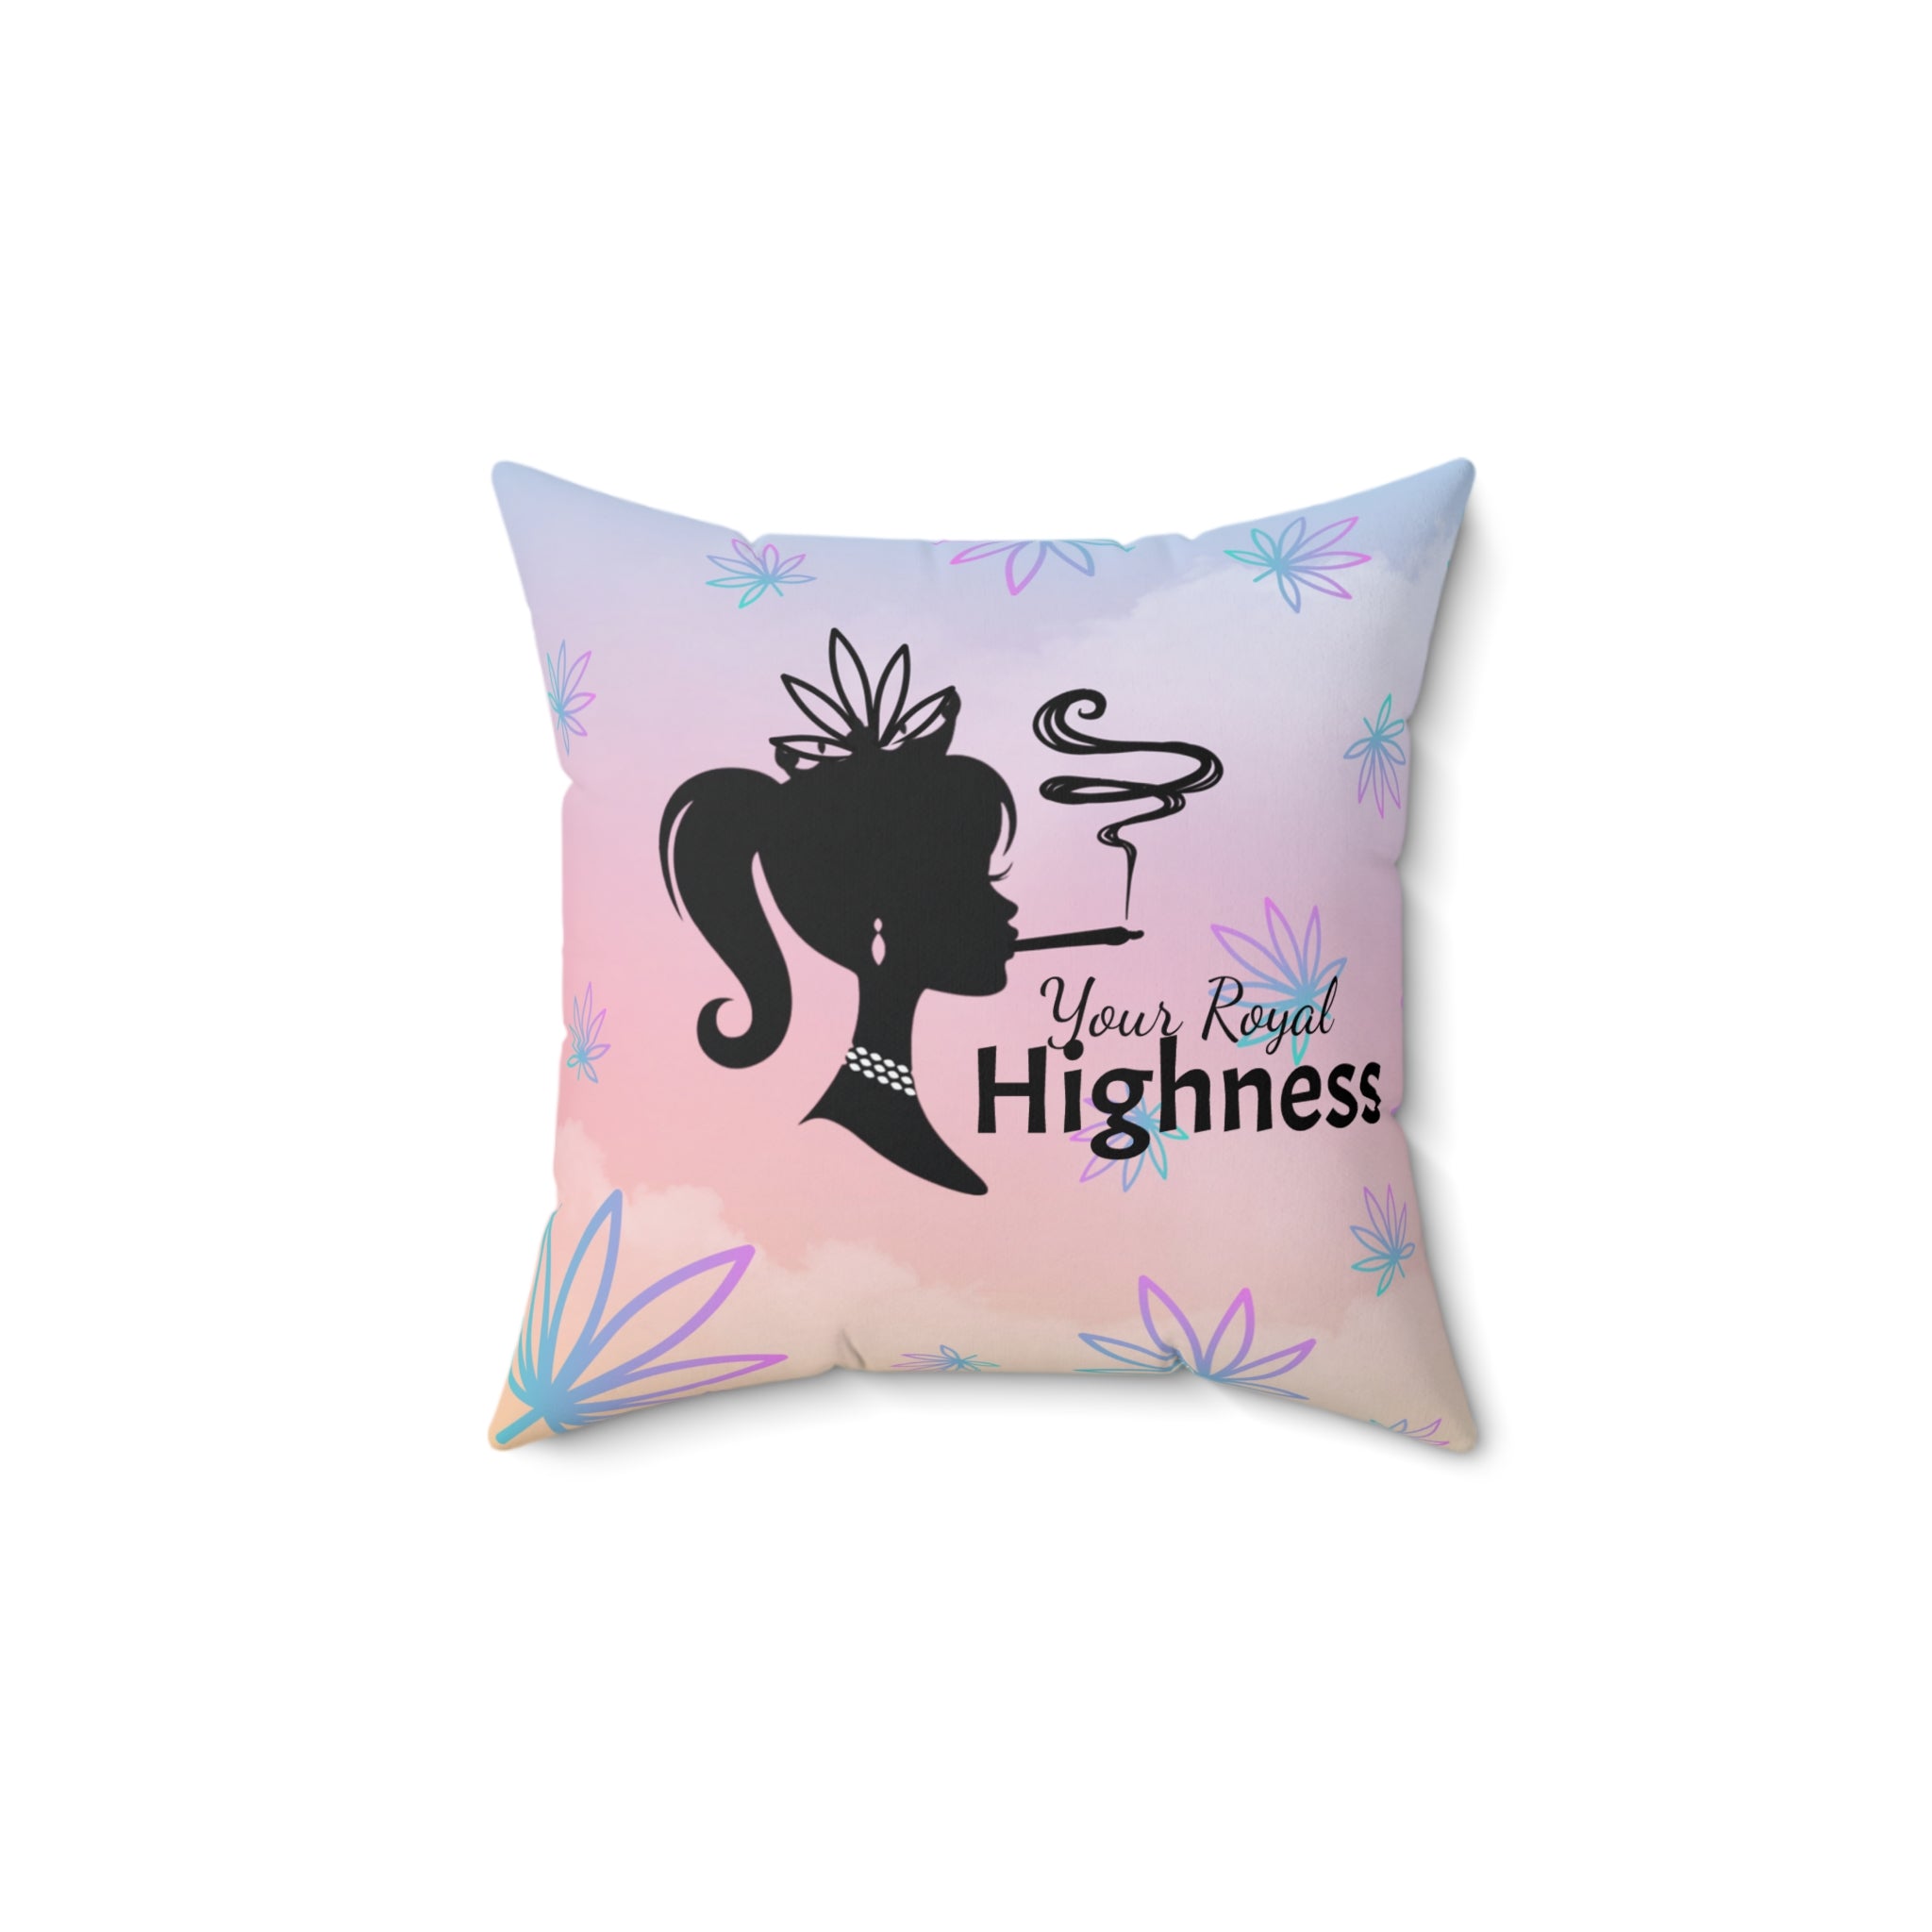 Your Royal Highness Square Pillow Stoner Gift